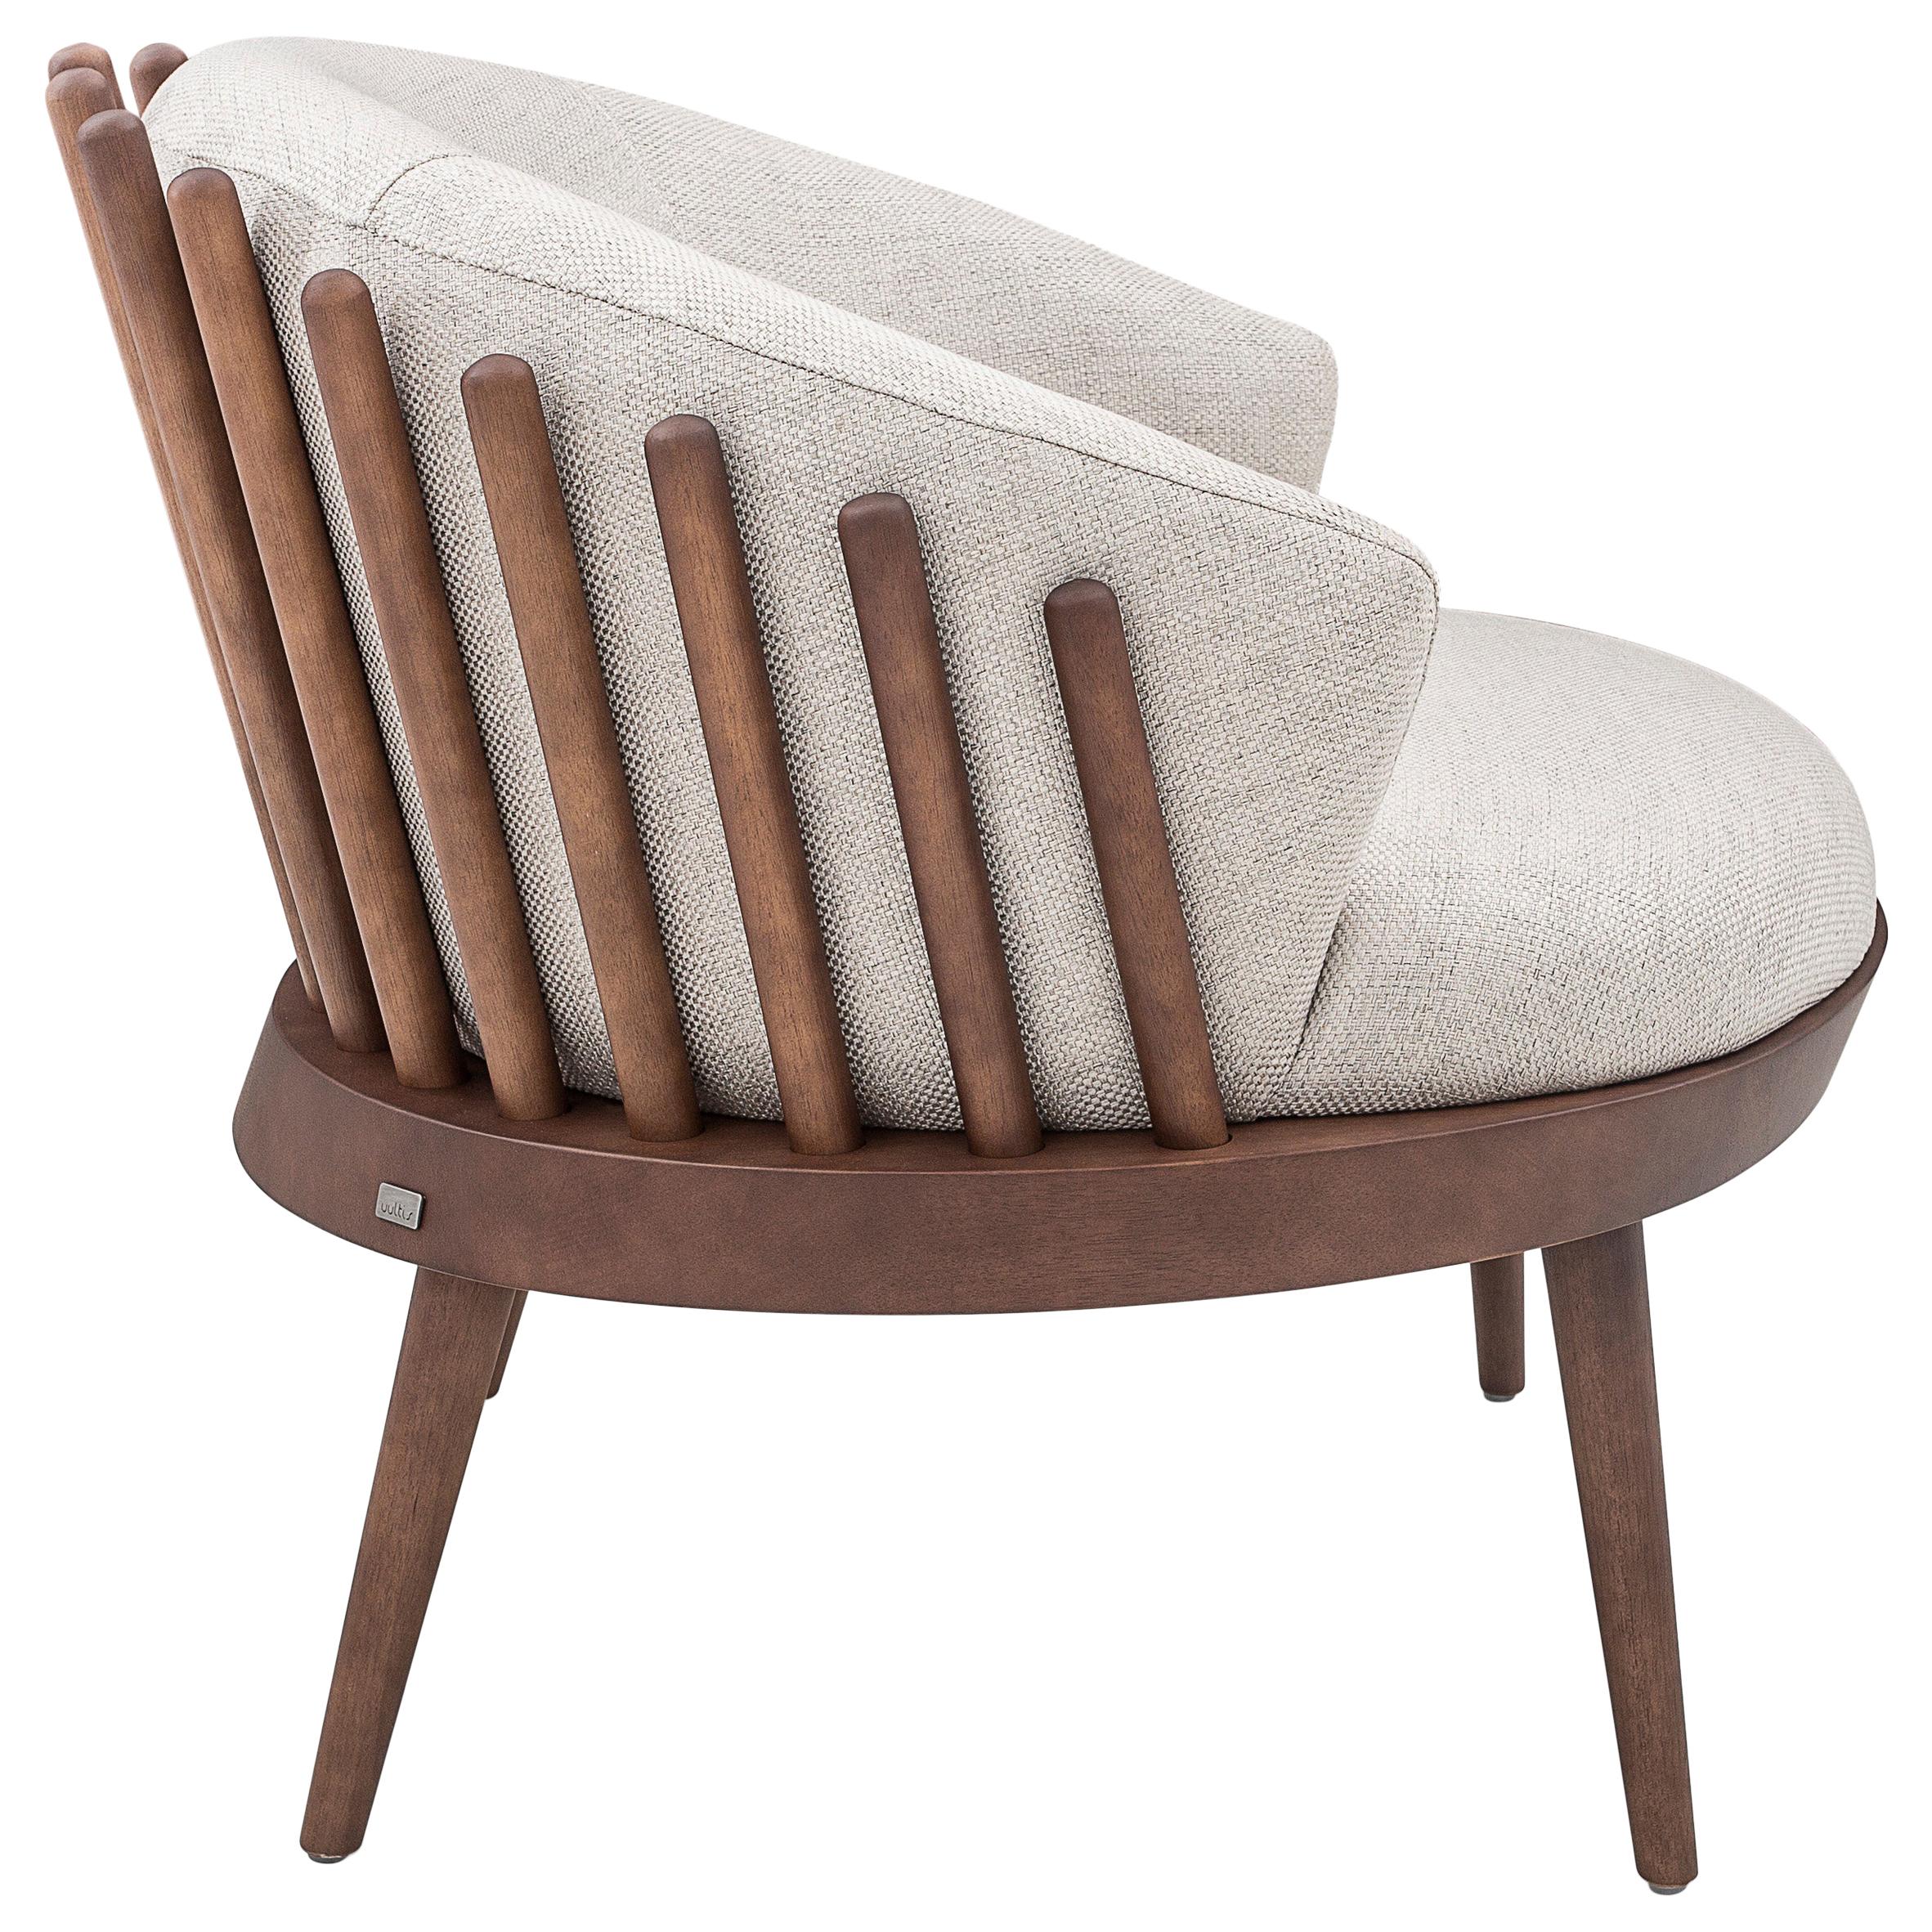 Fane Upholstered Armchair in Walnut Wood Finish and Off-White Fabric